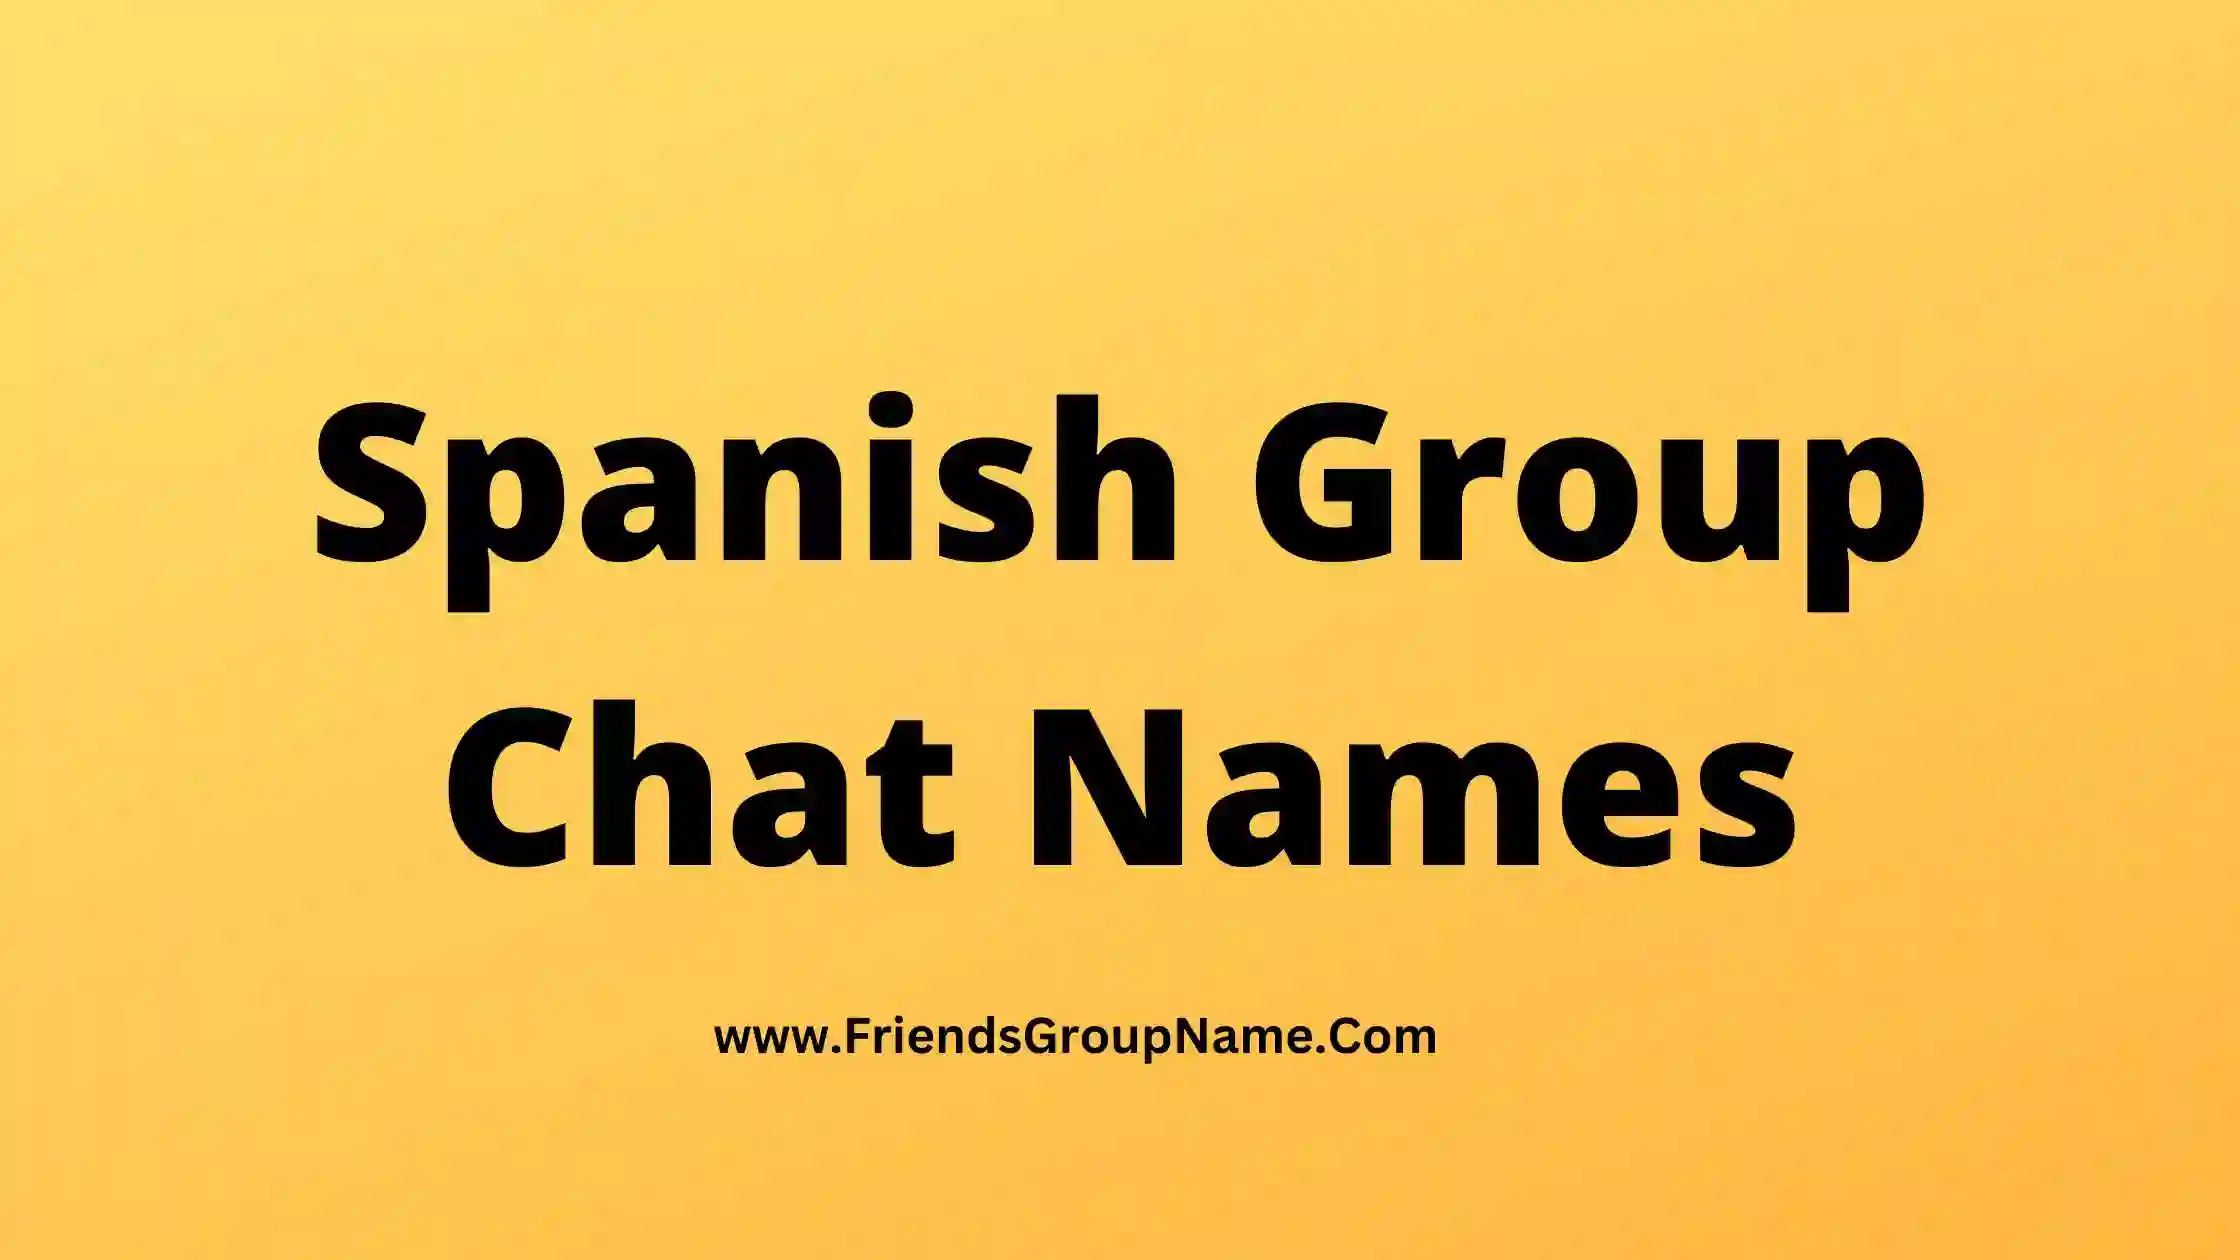 Spanish Group Chat Names